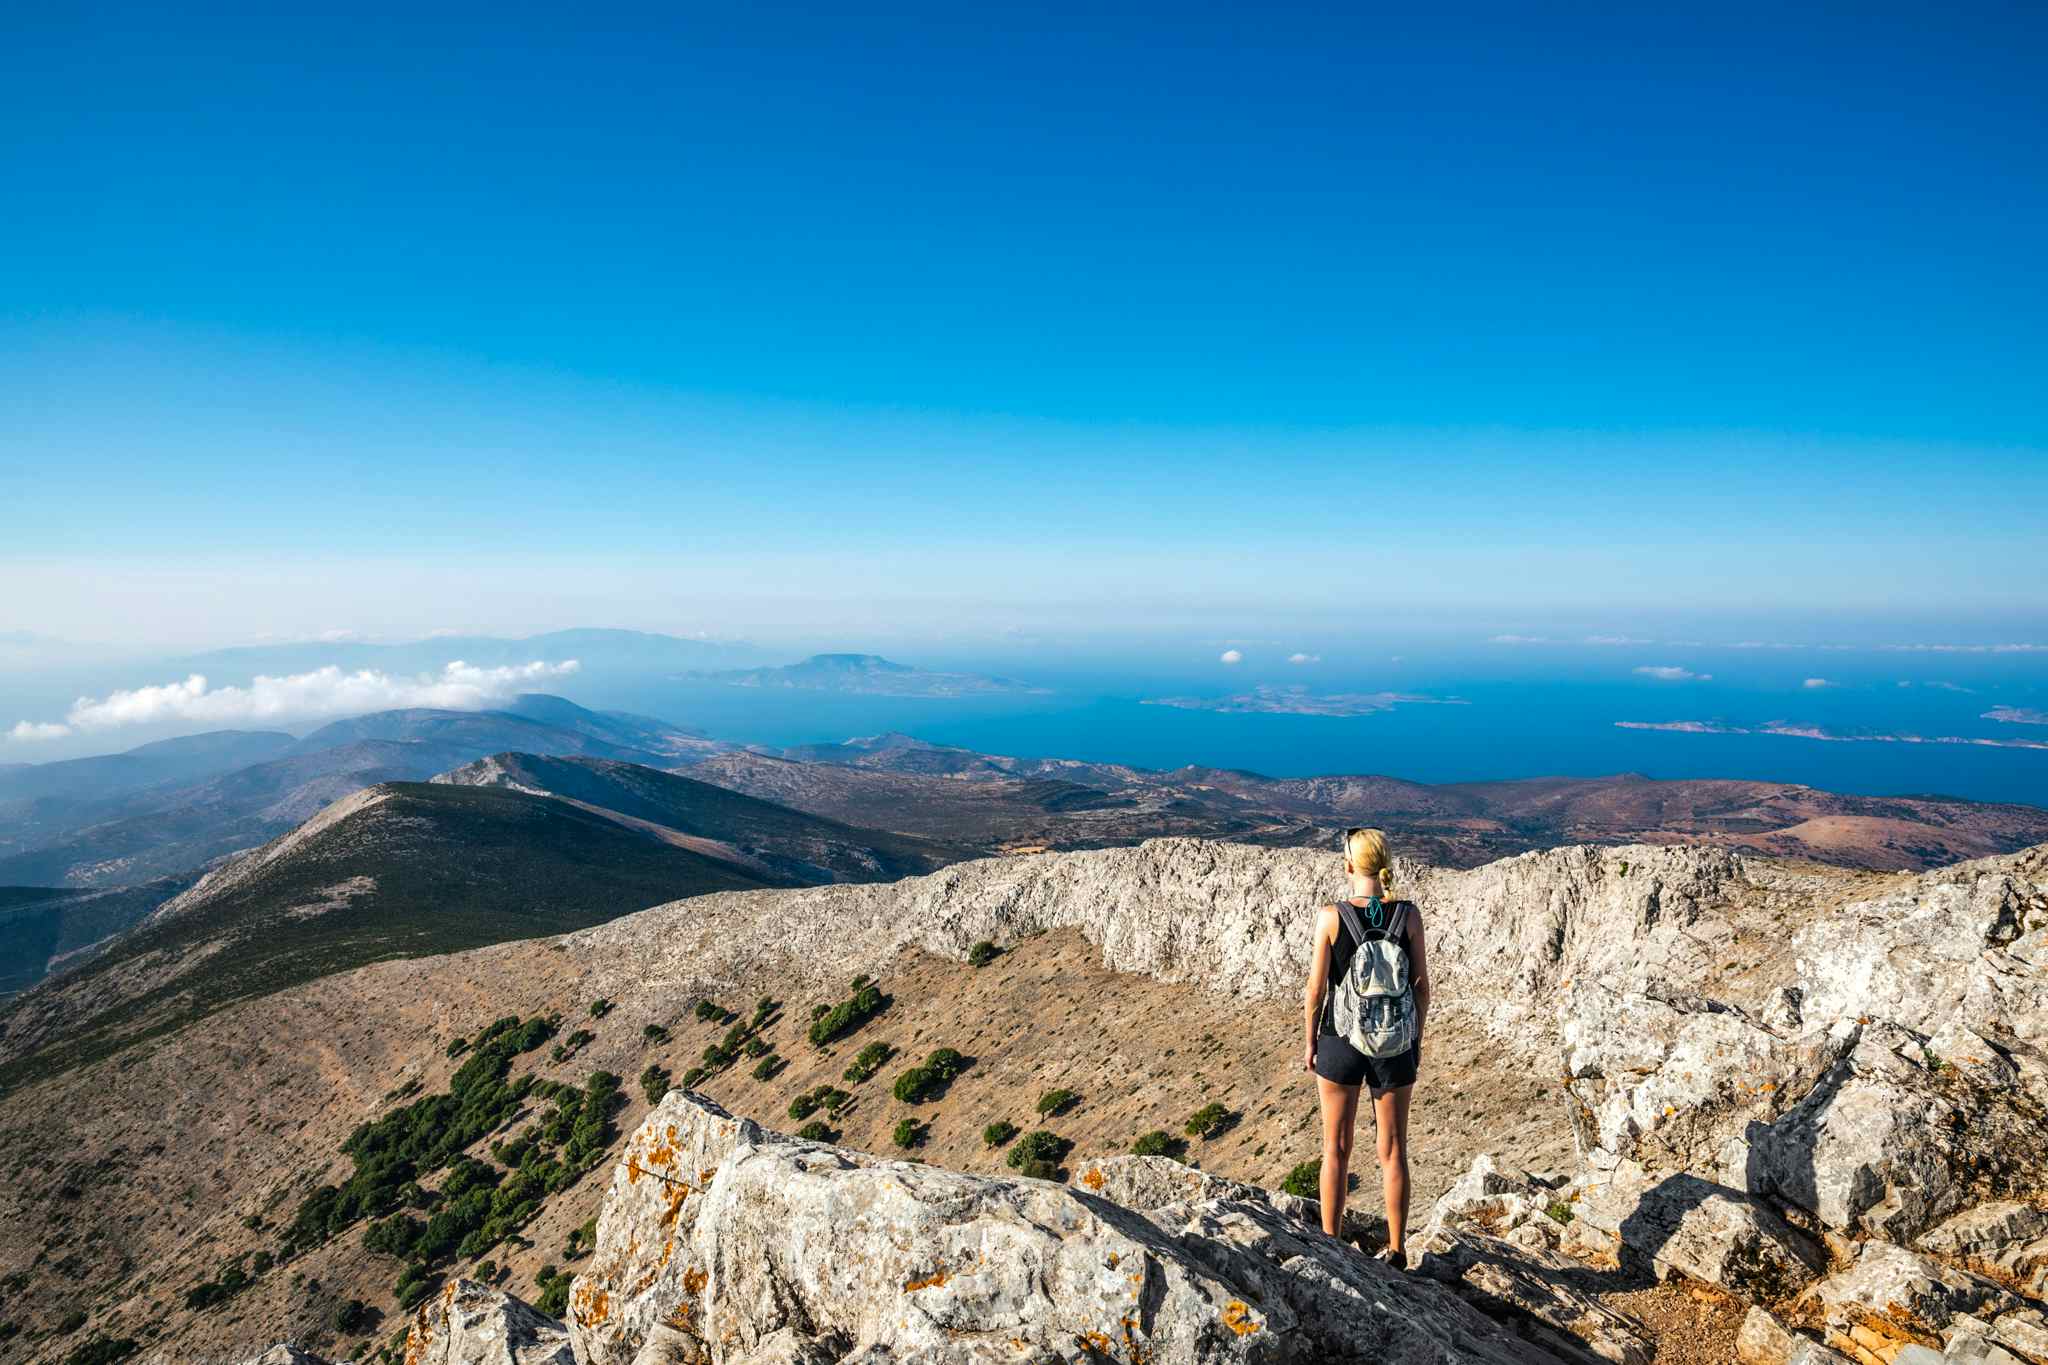 CANVA - Hiker at the summit of Mount Zas on Nazos in the Cyclades Islands, Greece. Photo: Canva link: https://www.canva.com/photos/MAEI-ybH_Ho-on-top-of-mount-zas/
